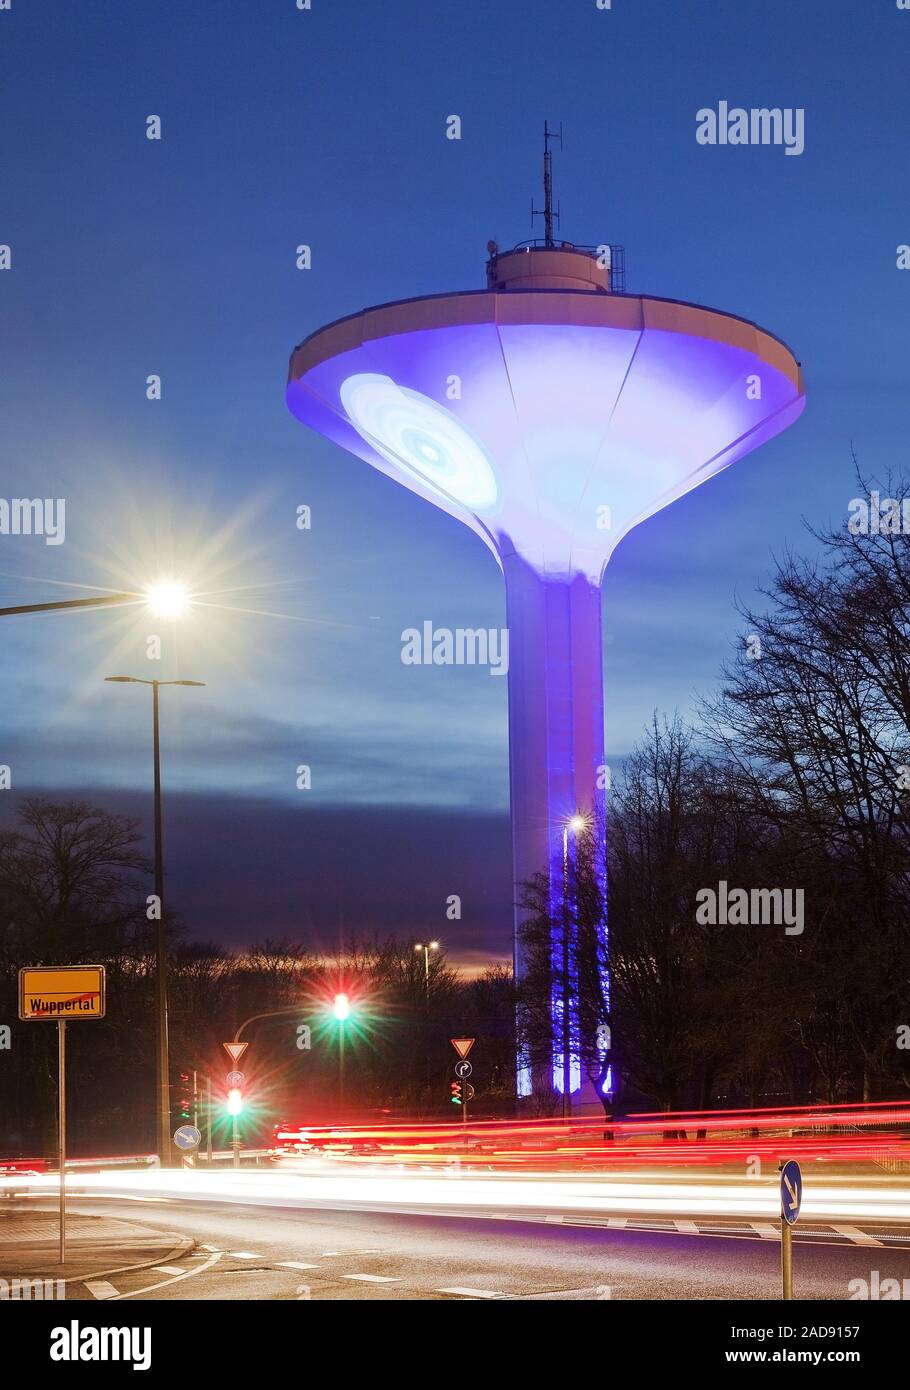 illuminated water tower Lichtscheid in the evening, Wuppertal, North Rhine-Westphalia, Germany Stock Photo